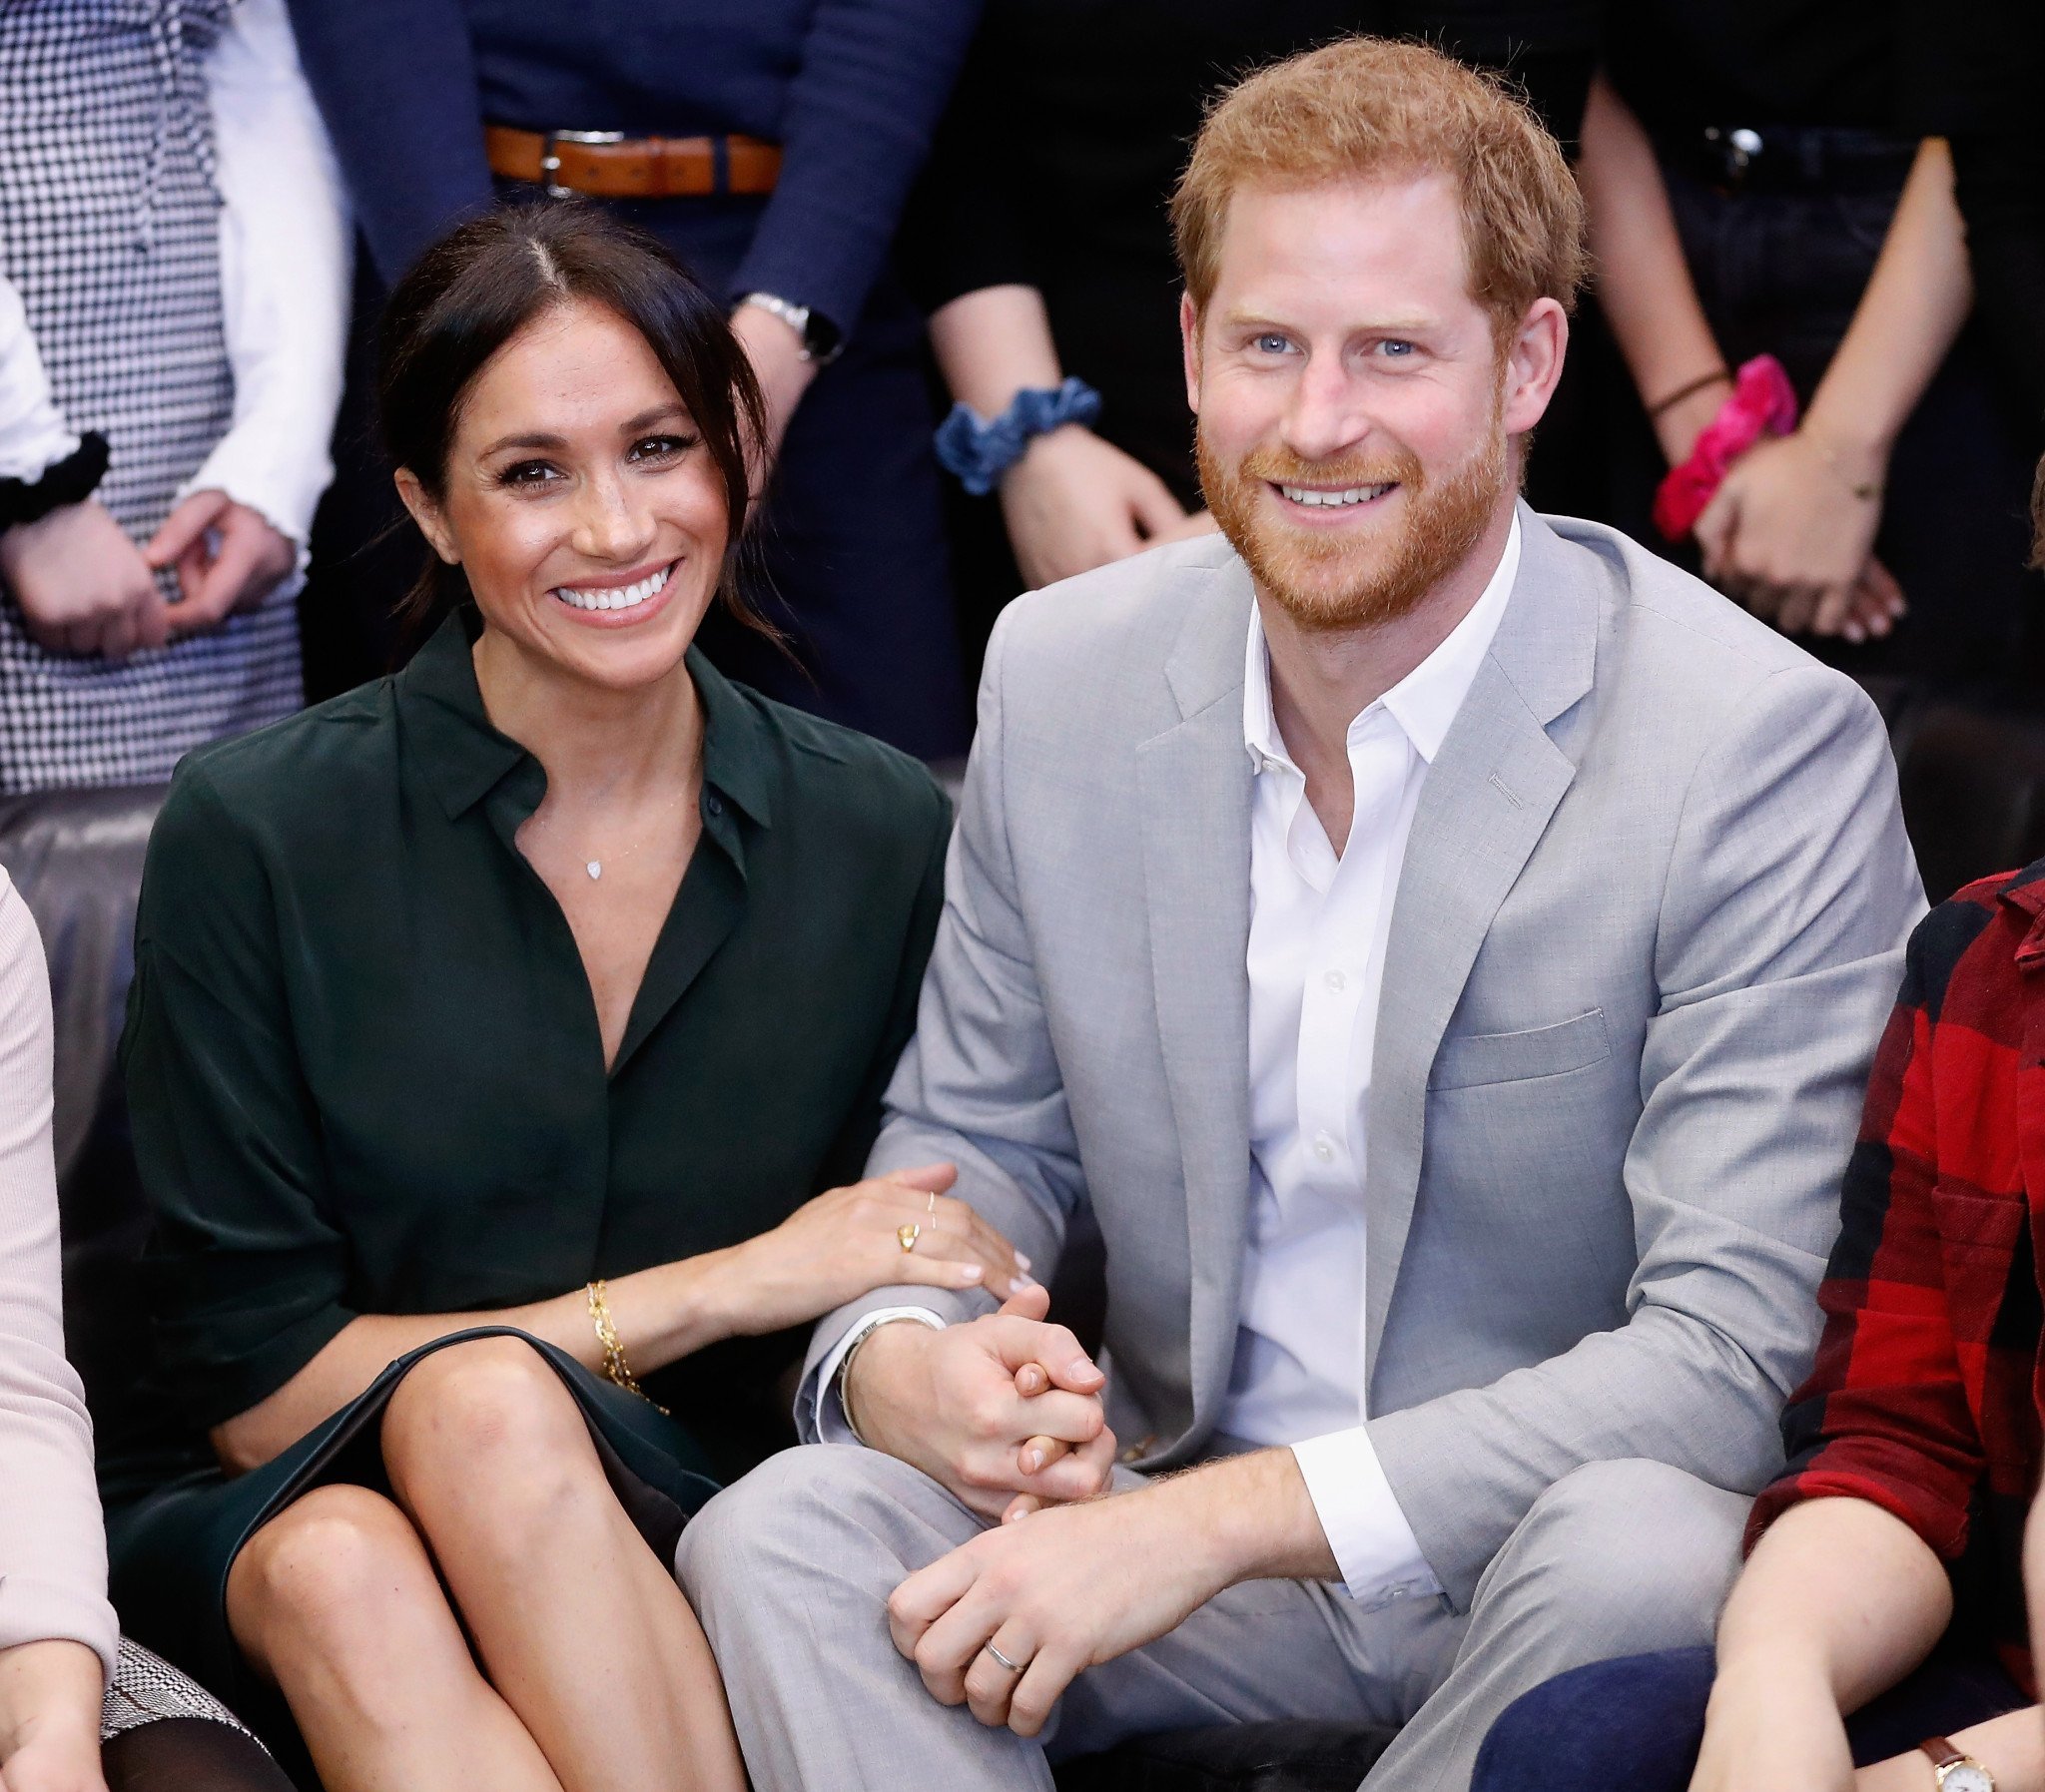 Prince Harry and Meghan Markle welcome baby girl named Lilibet Diana